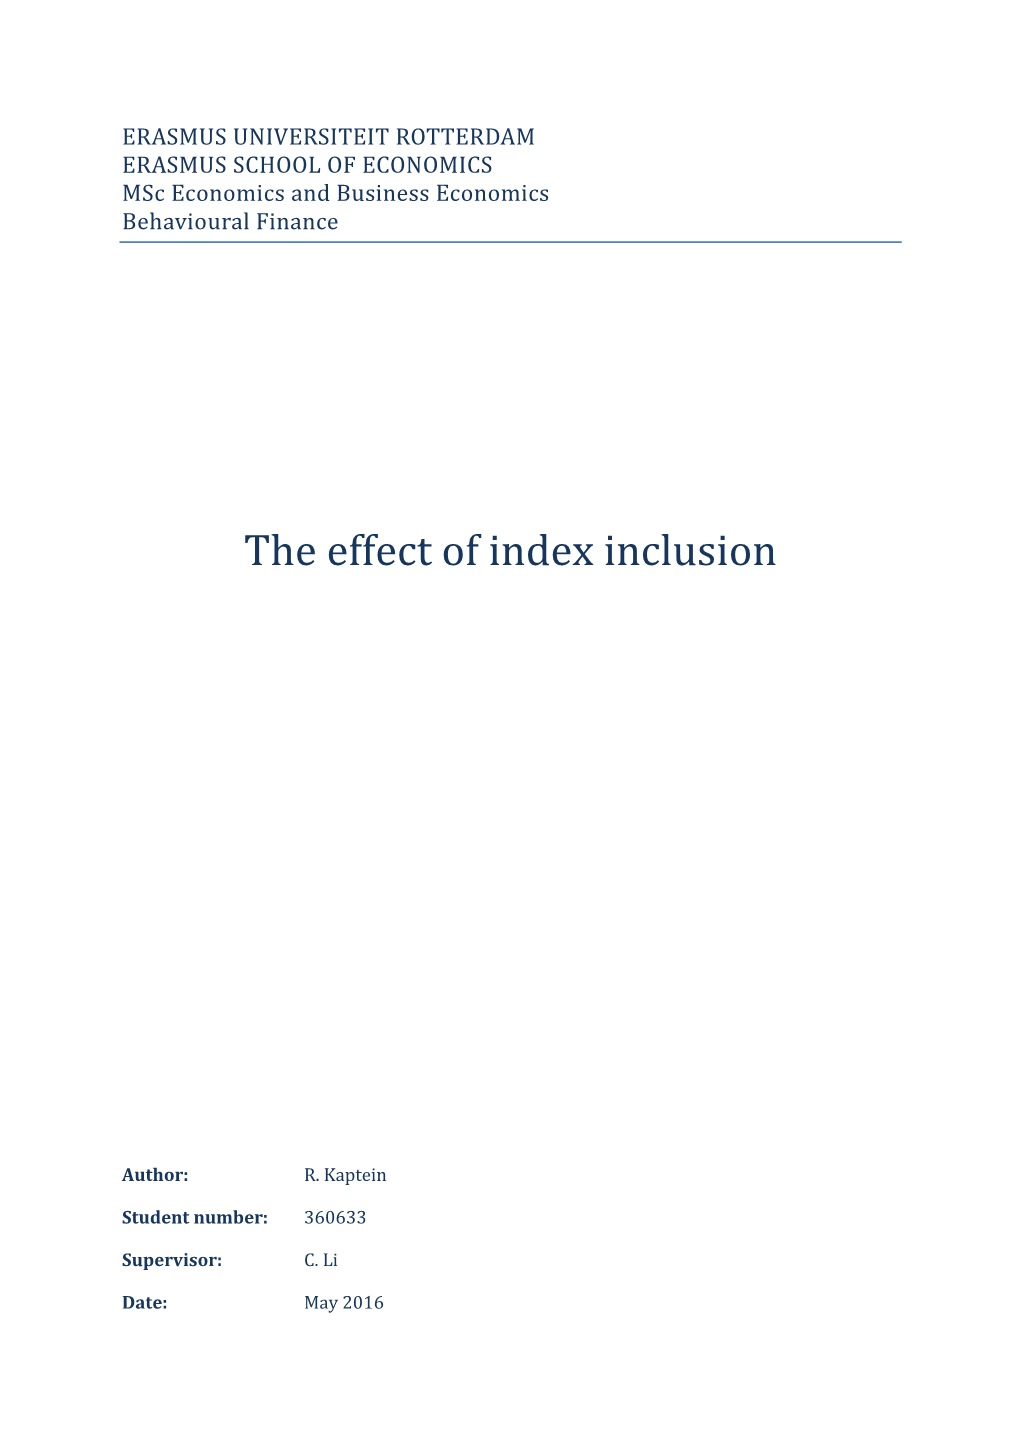 The Effect of Index Inclusion